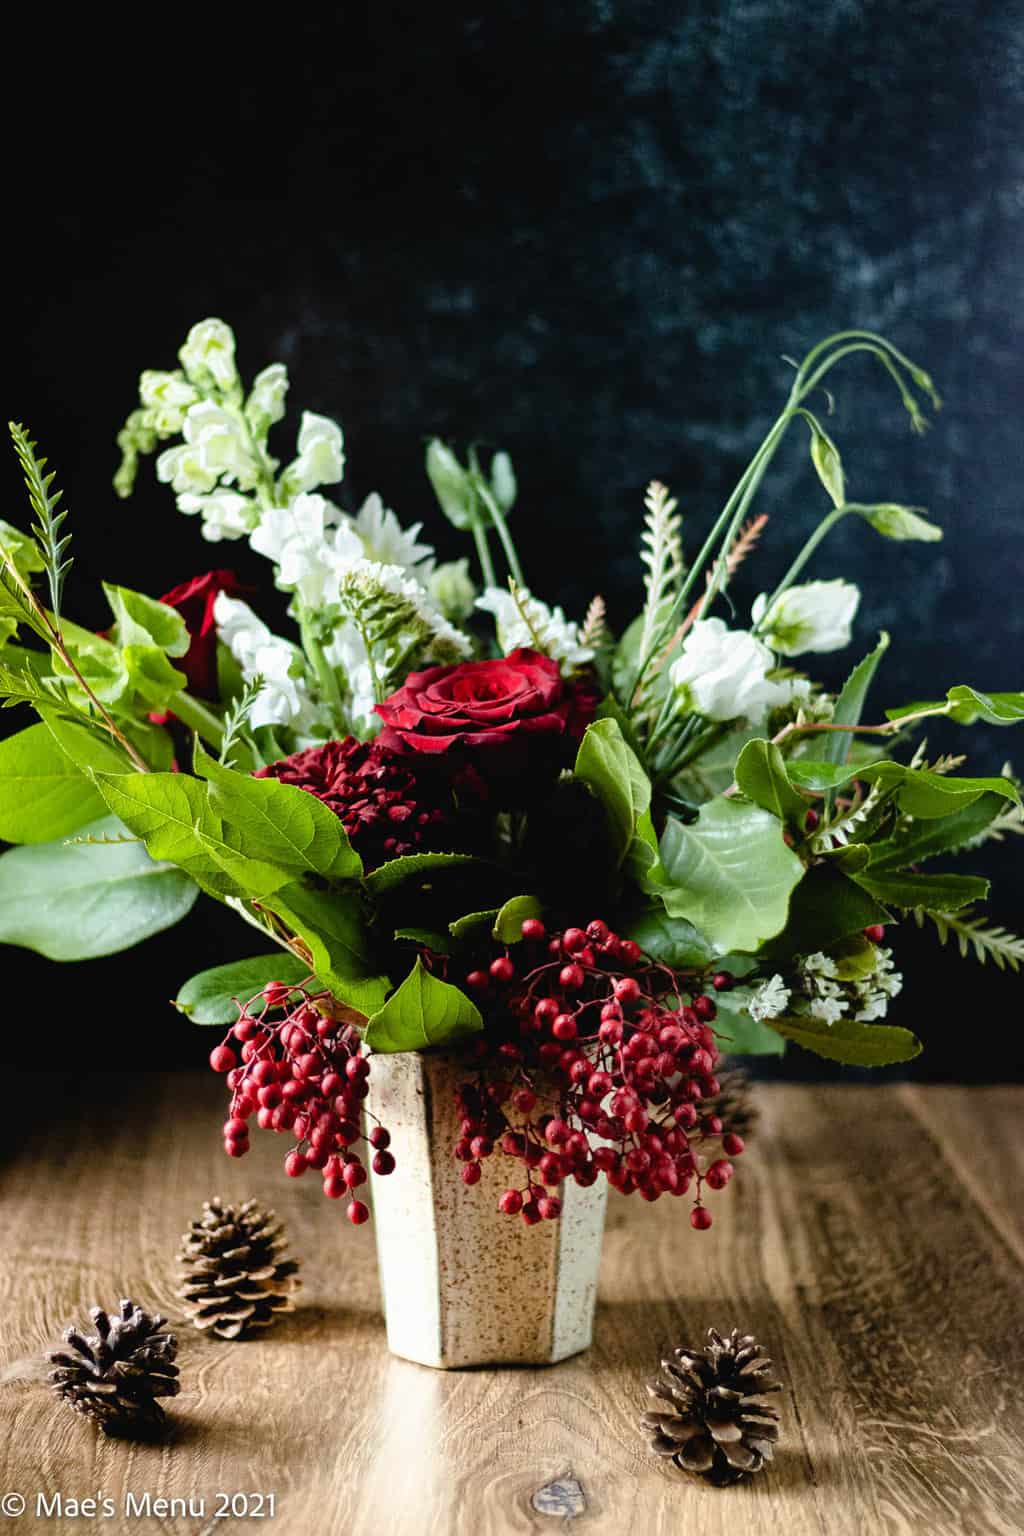 A side shot of a Christmas floral bouquet with red roses and berries.